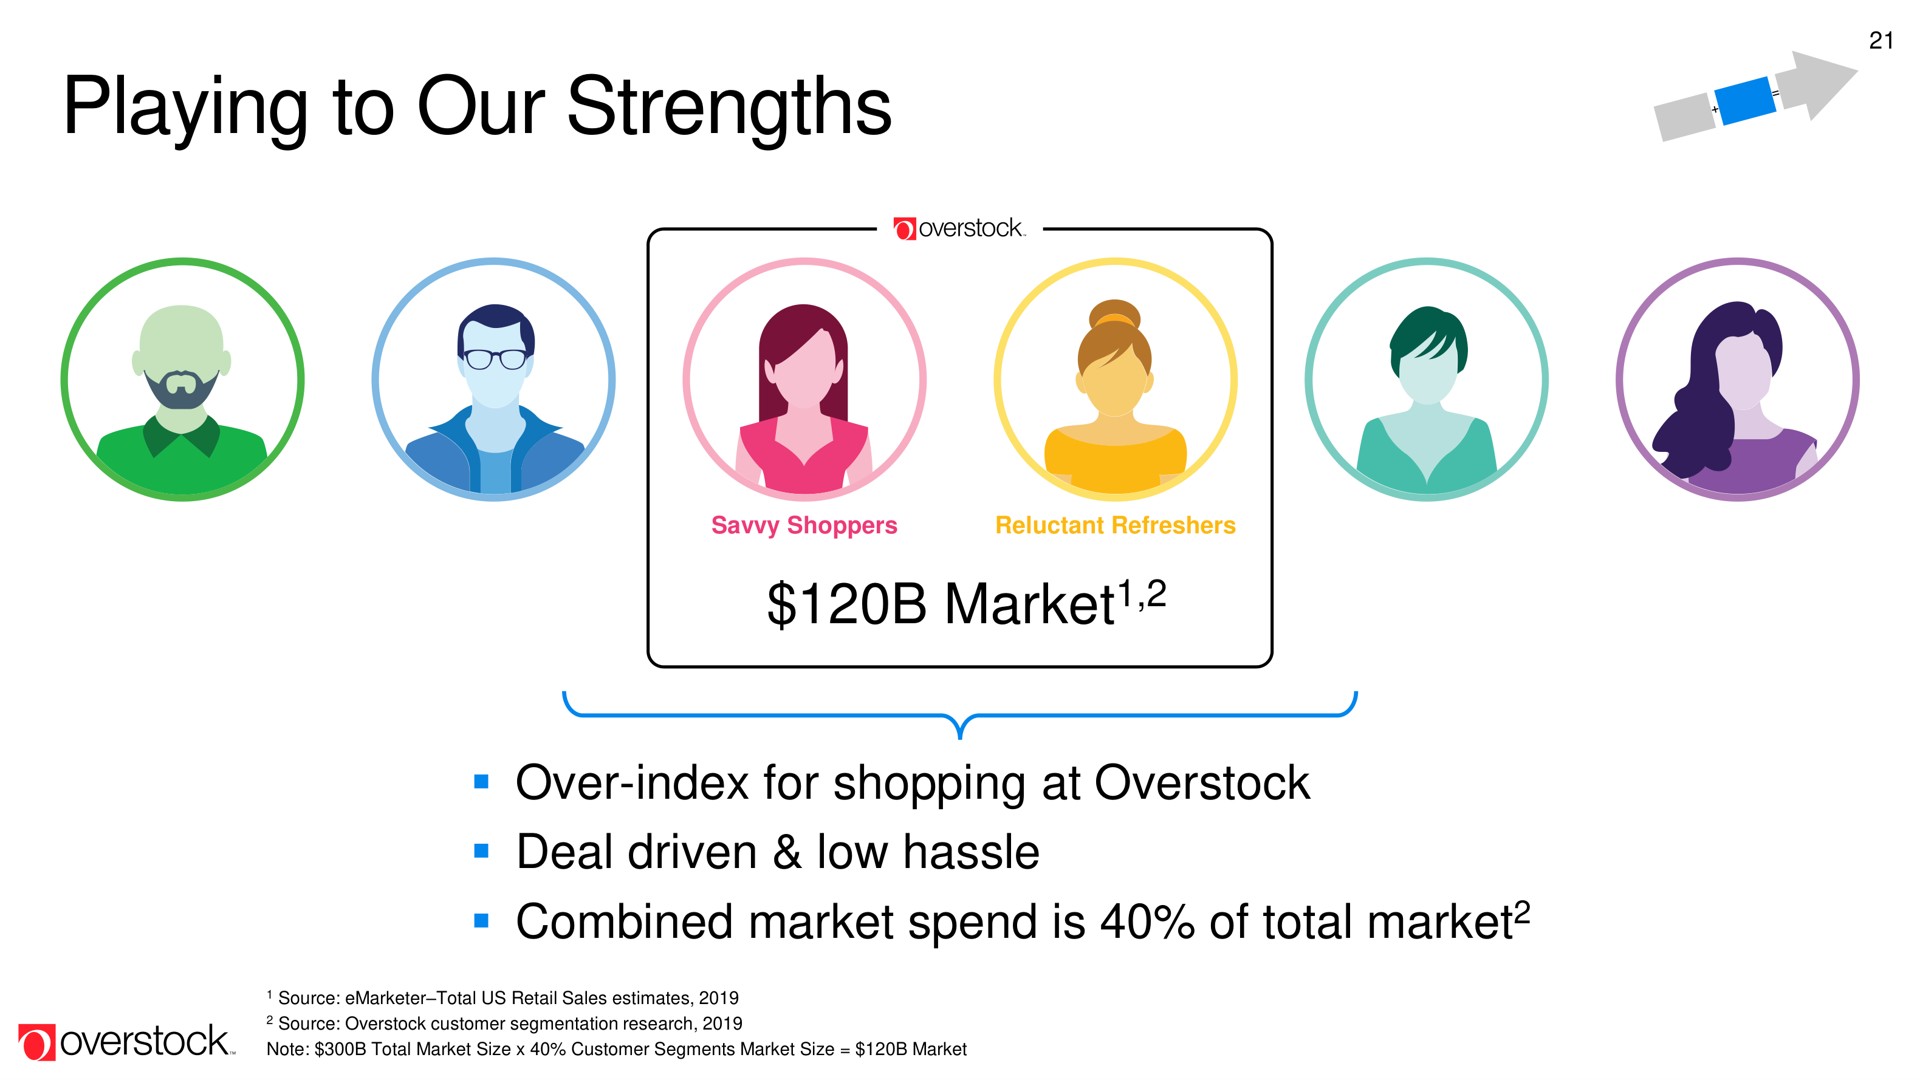 playing to our strengths | Overstock